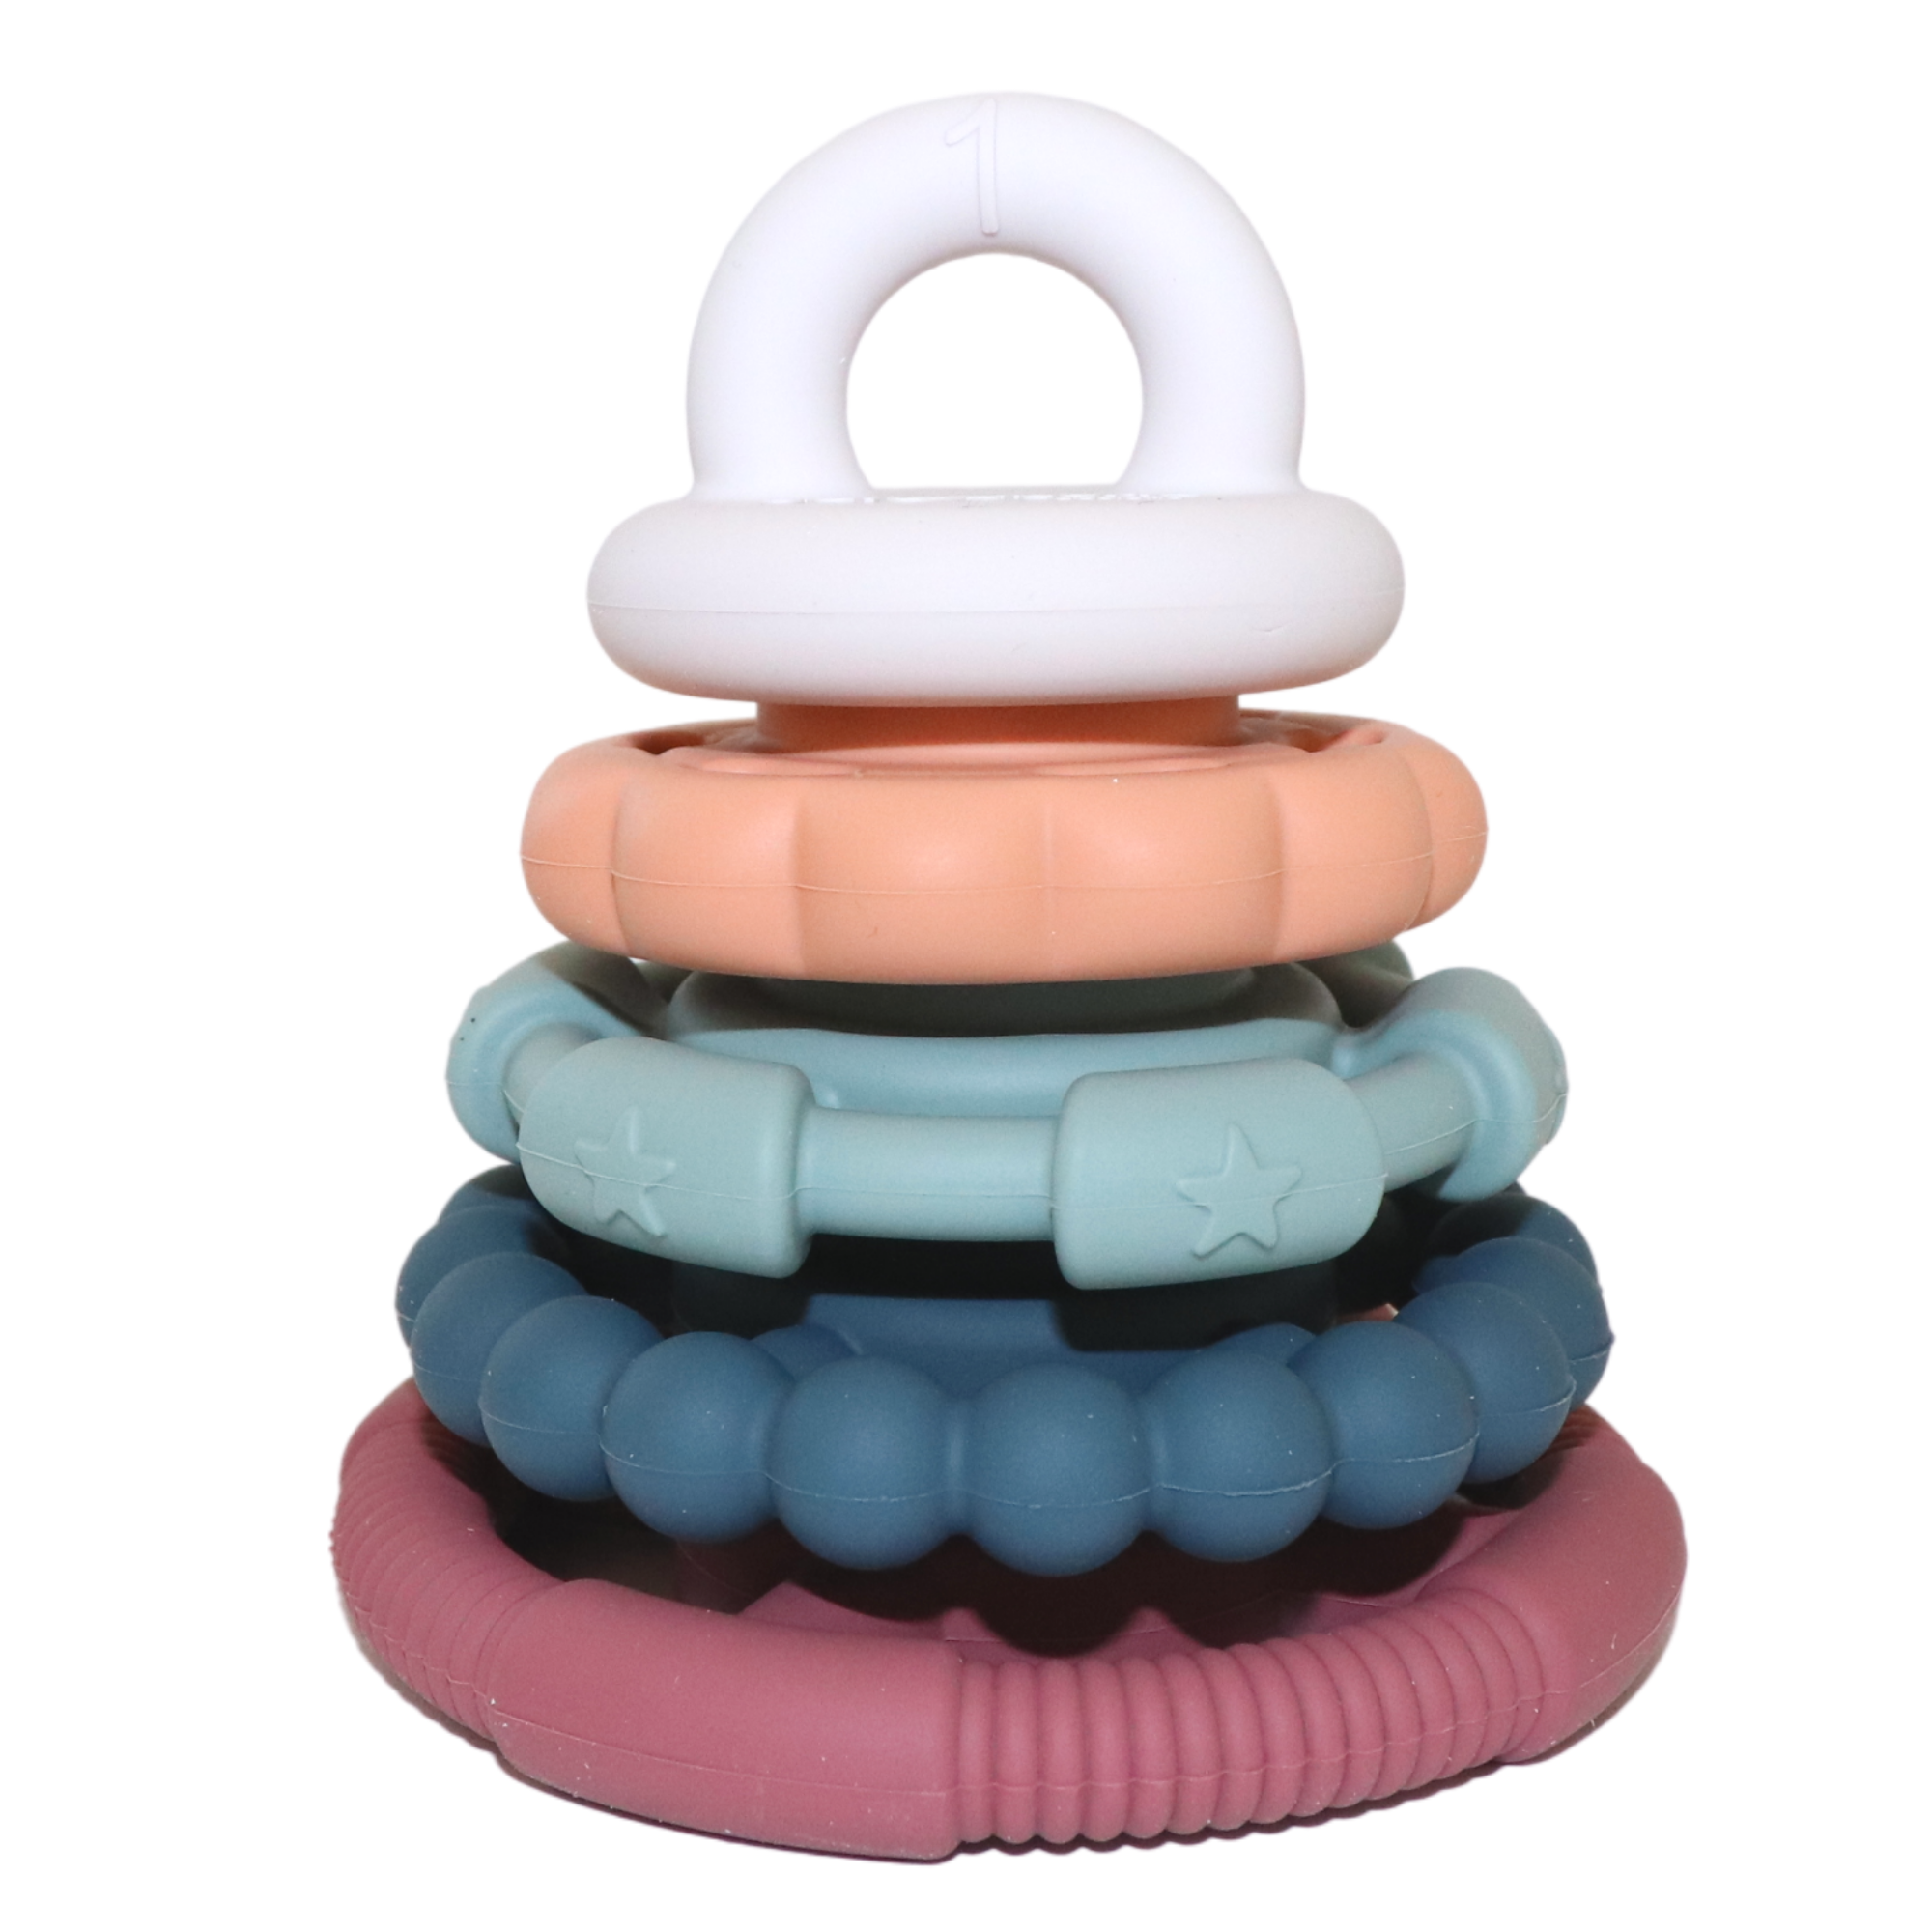 Jellystone Rainbow Stacker and Teether Toy - EARTH